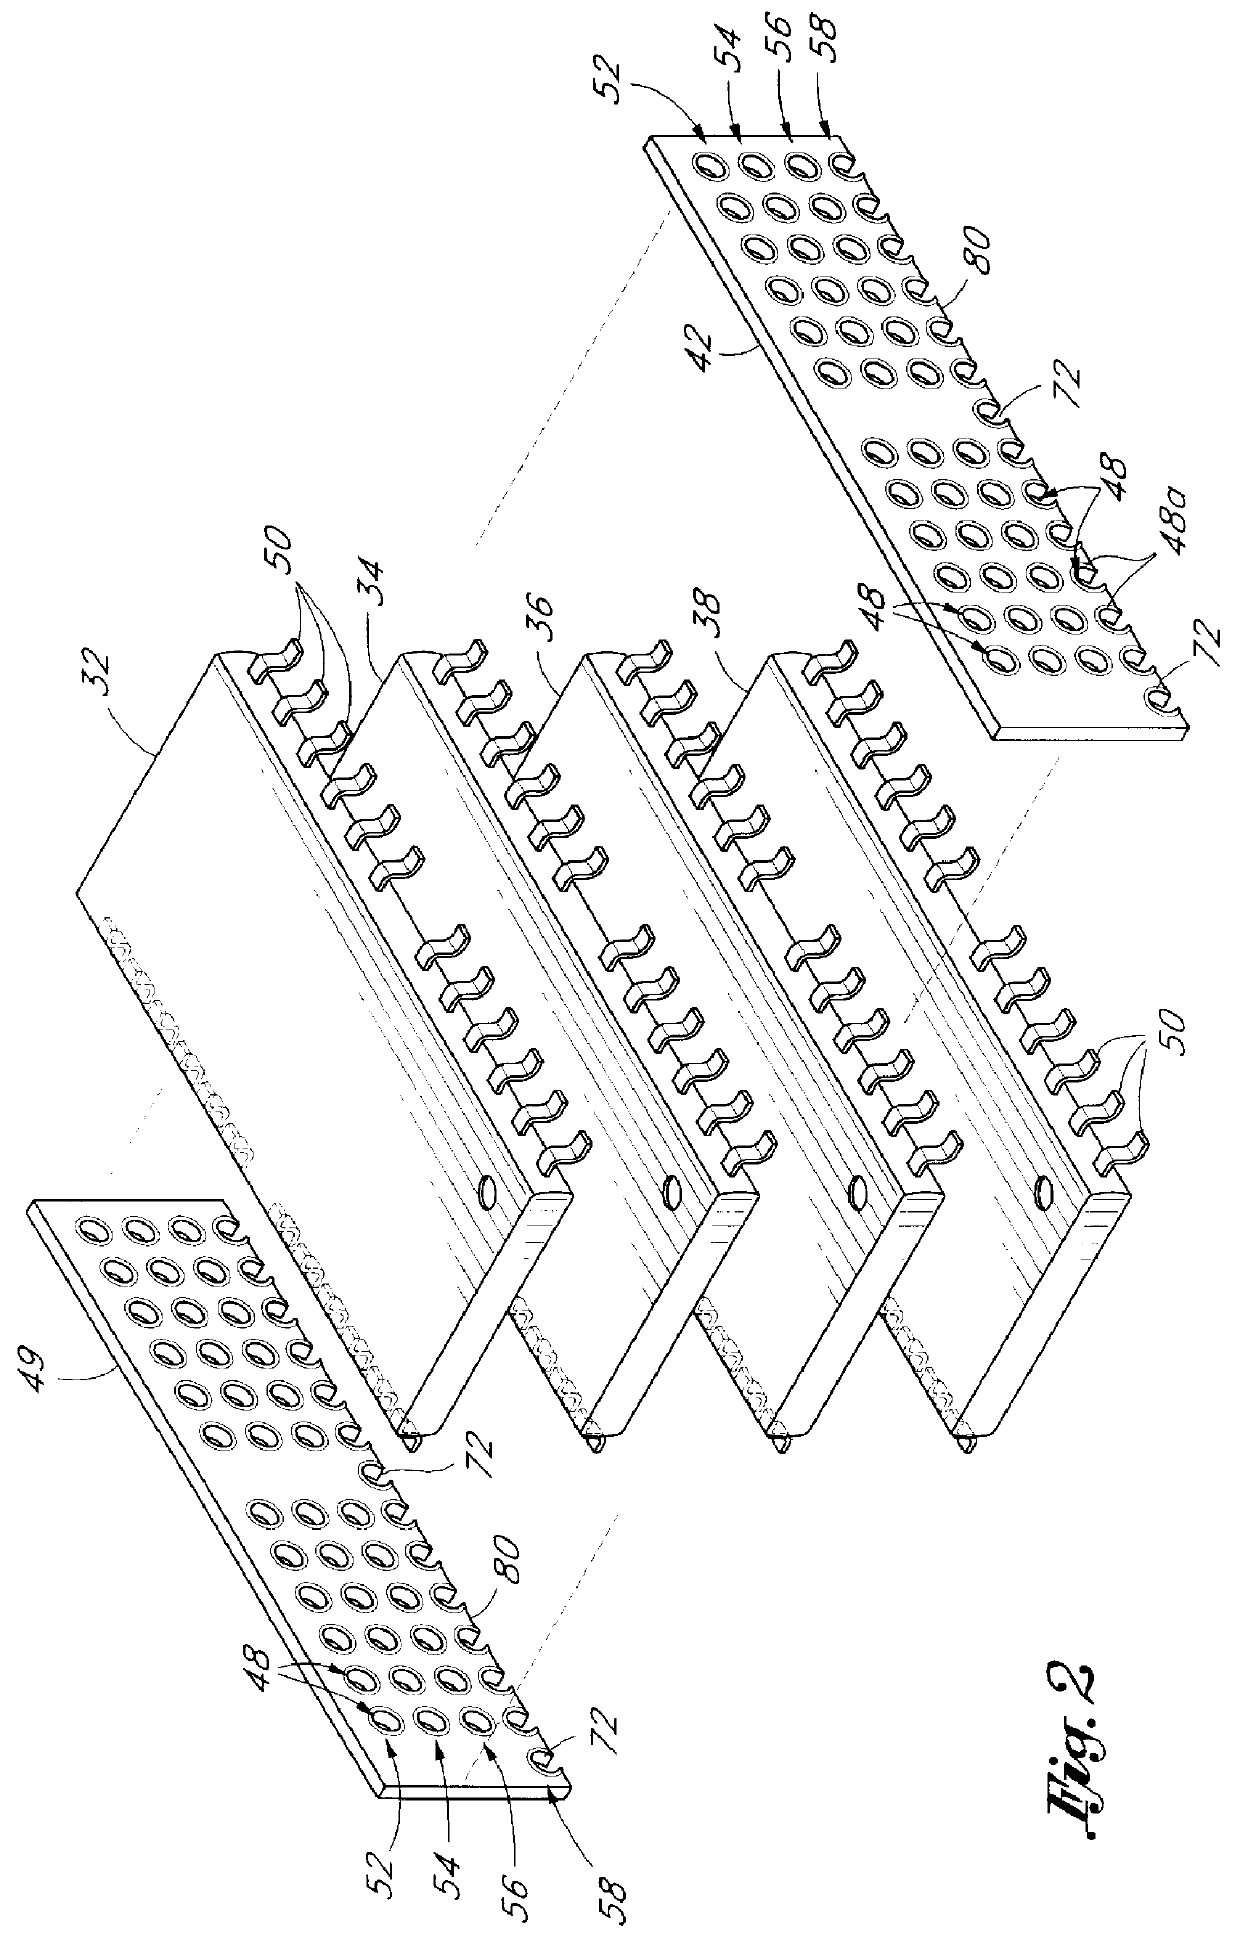 Apparatus for stacking semiconductor chips